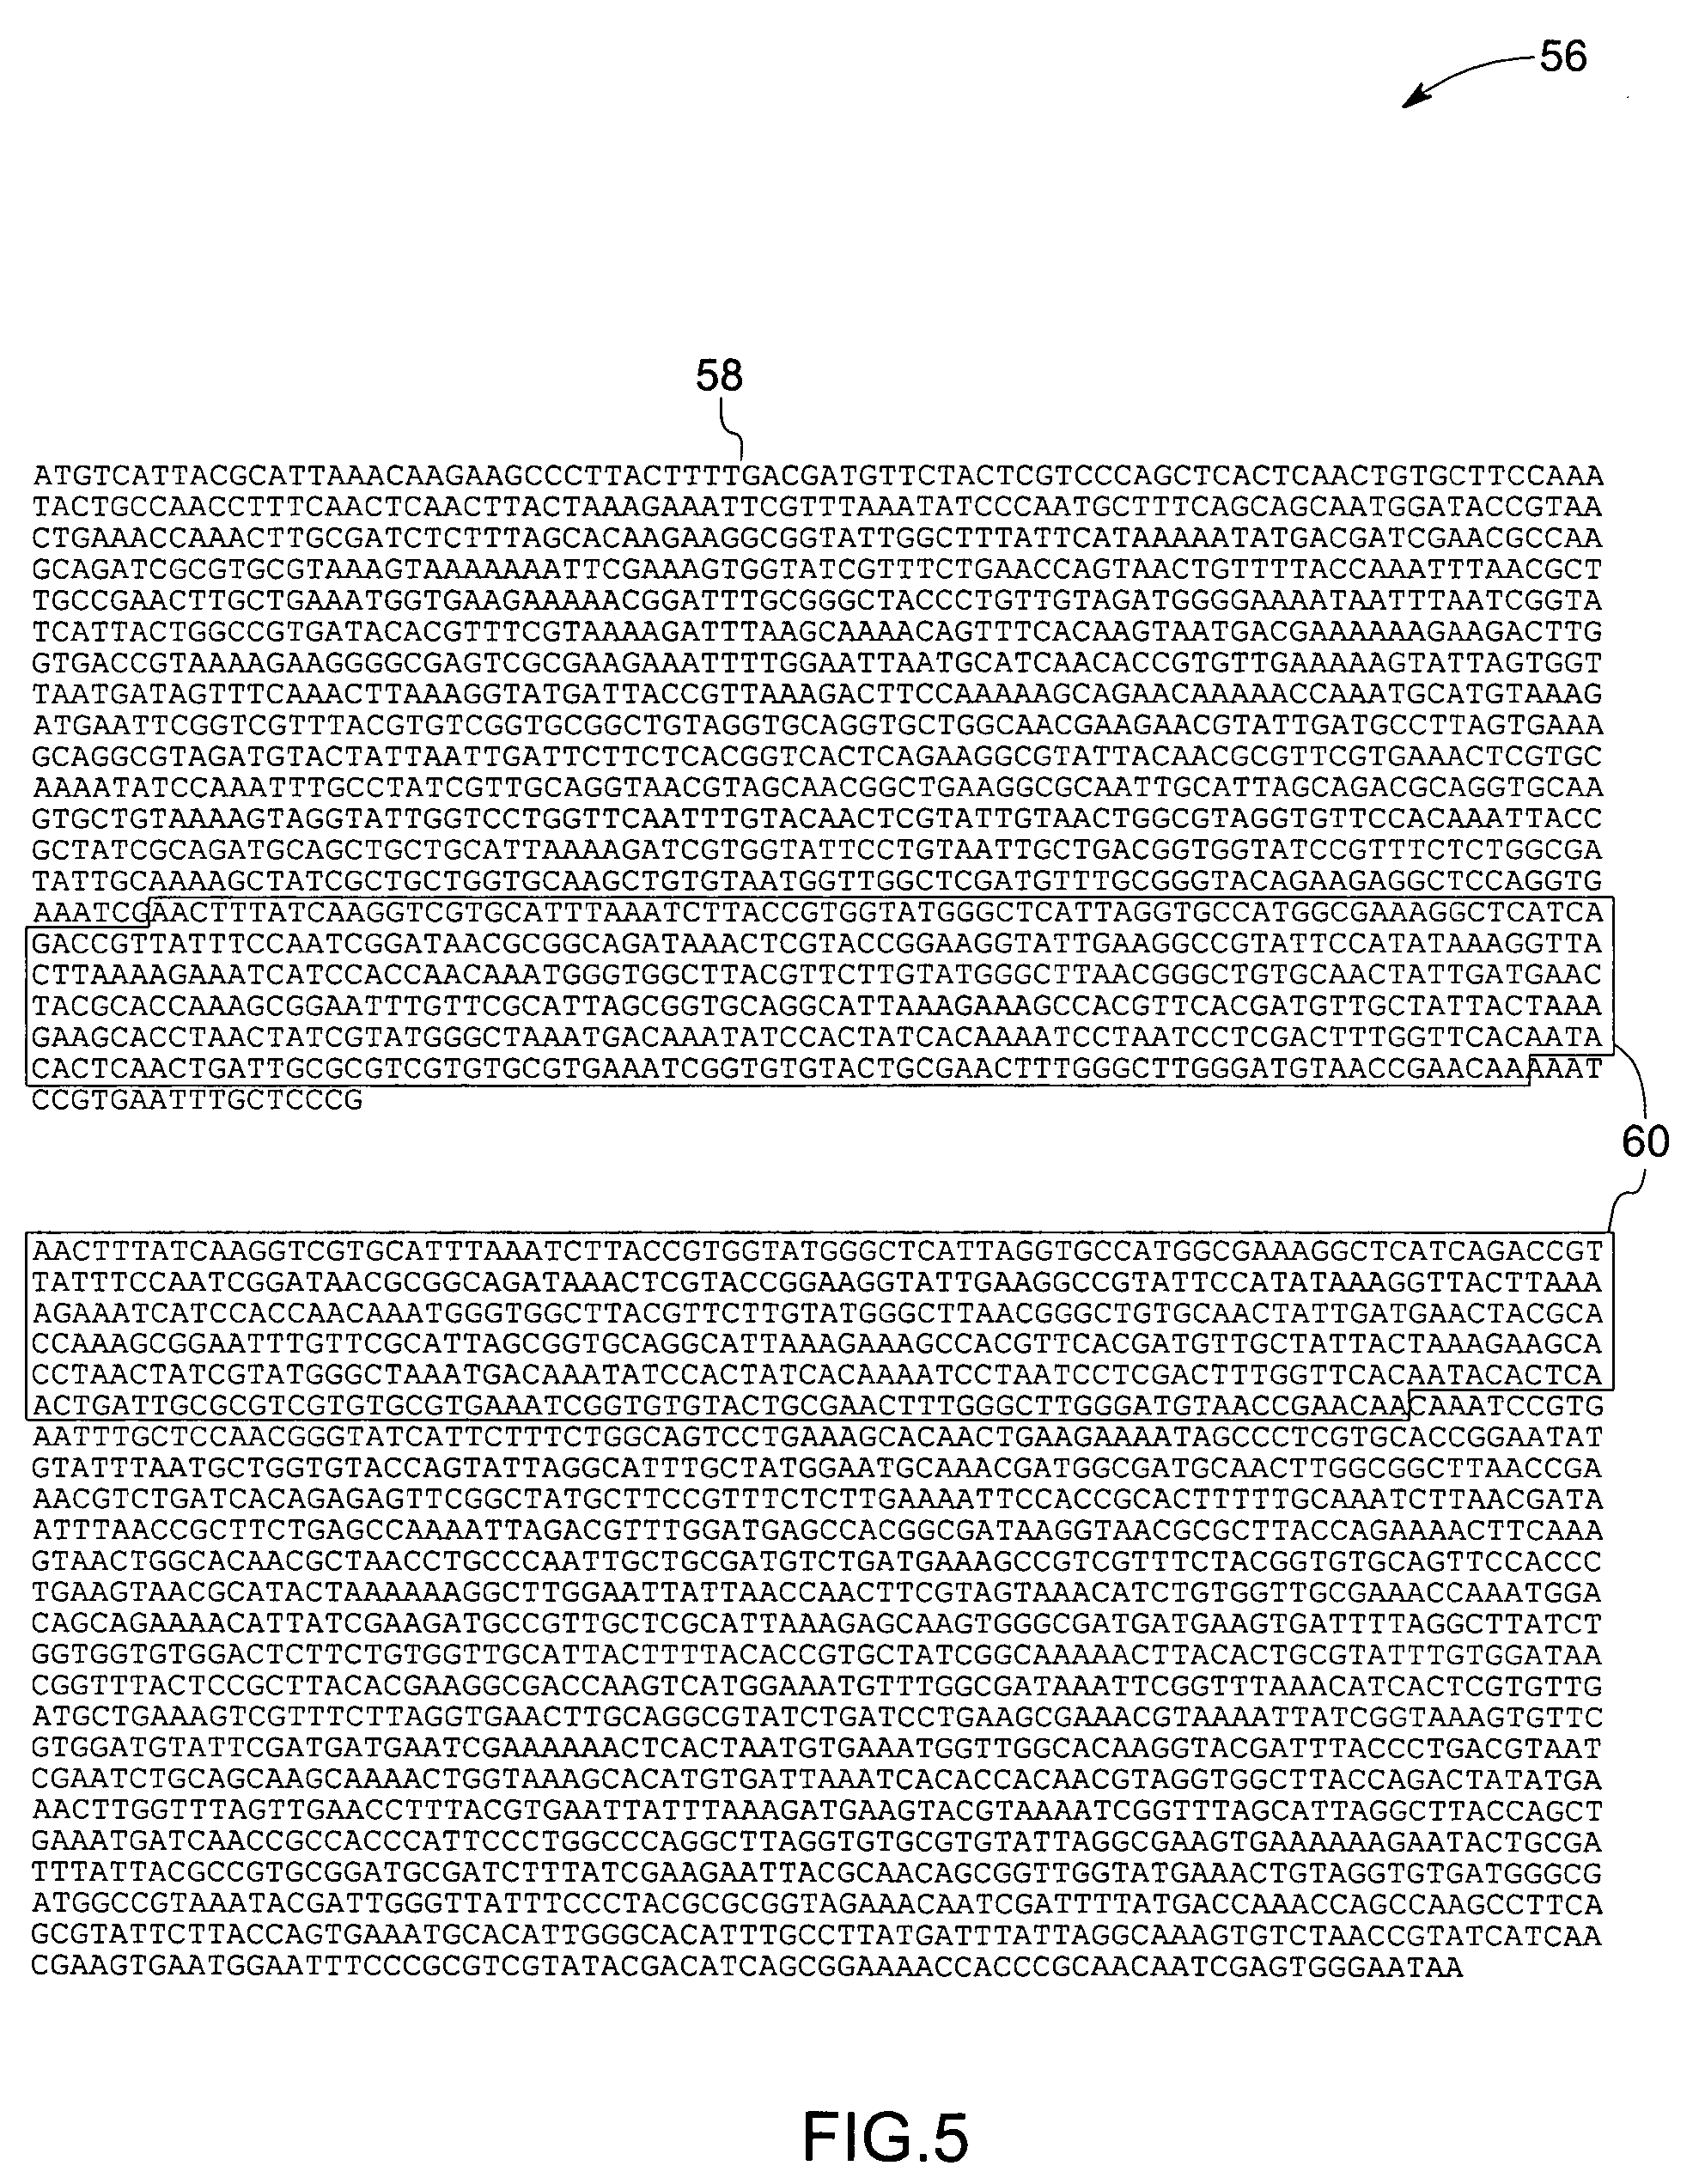 Method for identifying sub-sequences of interest in a sequence